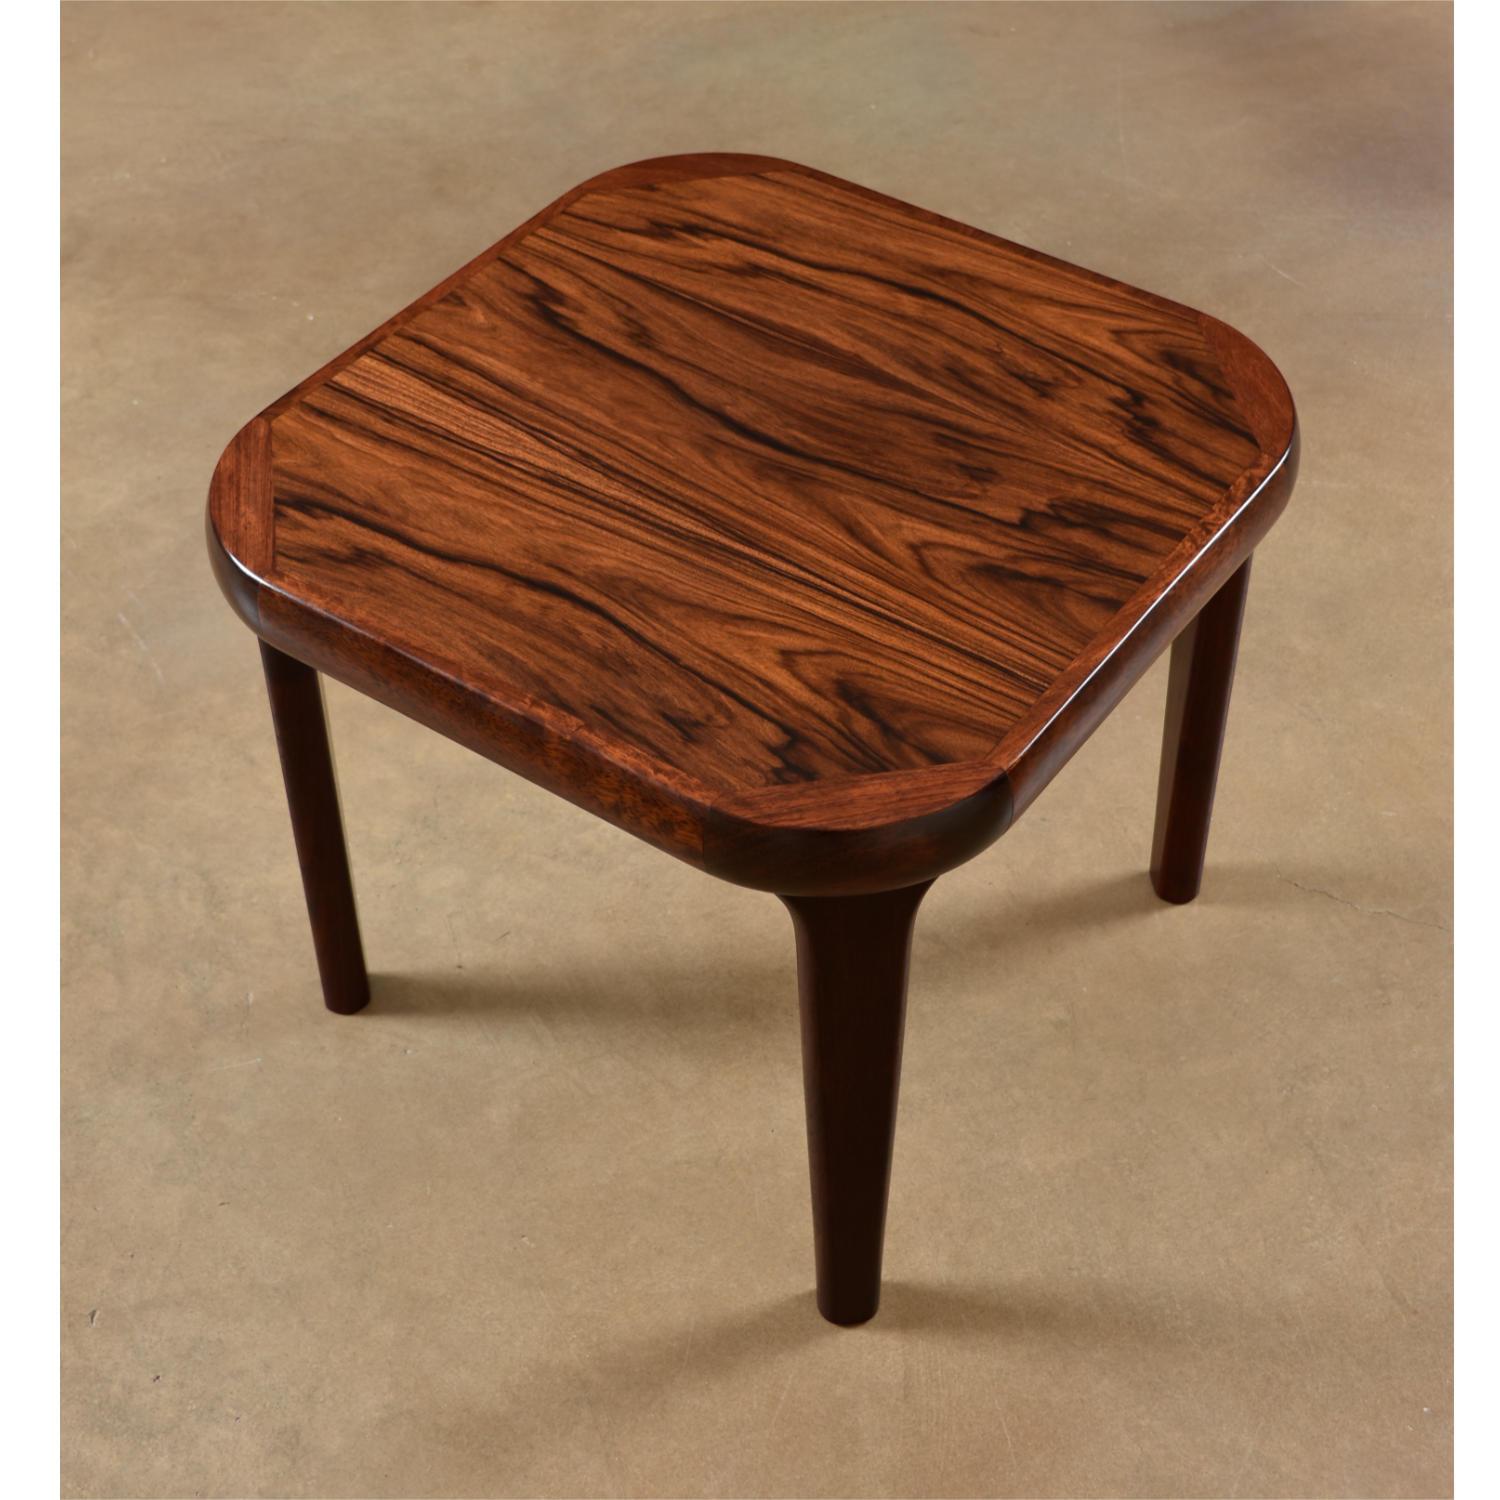 Scandinavian Modern Rounded Edge Square Danish Modern Rosewood End Table